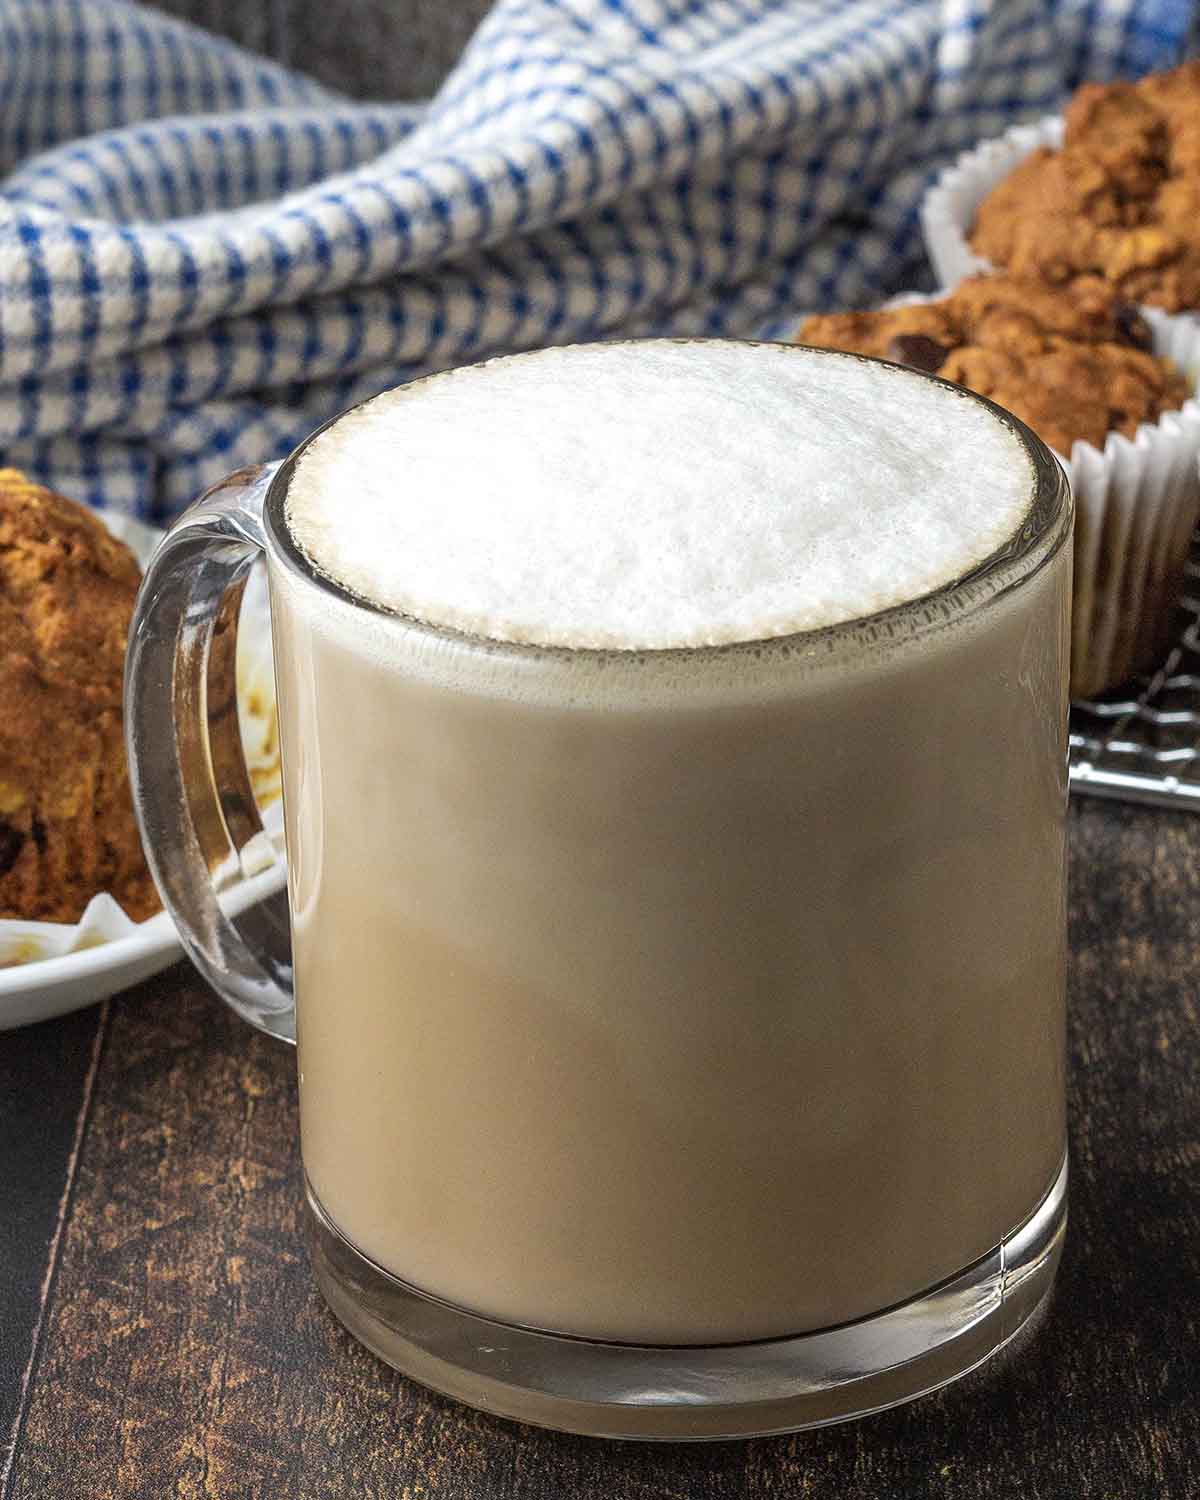 An oat latte in a glass mug sitting on a dark wood table, muffins sit behind the mug.